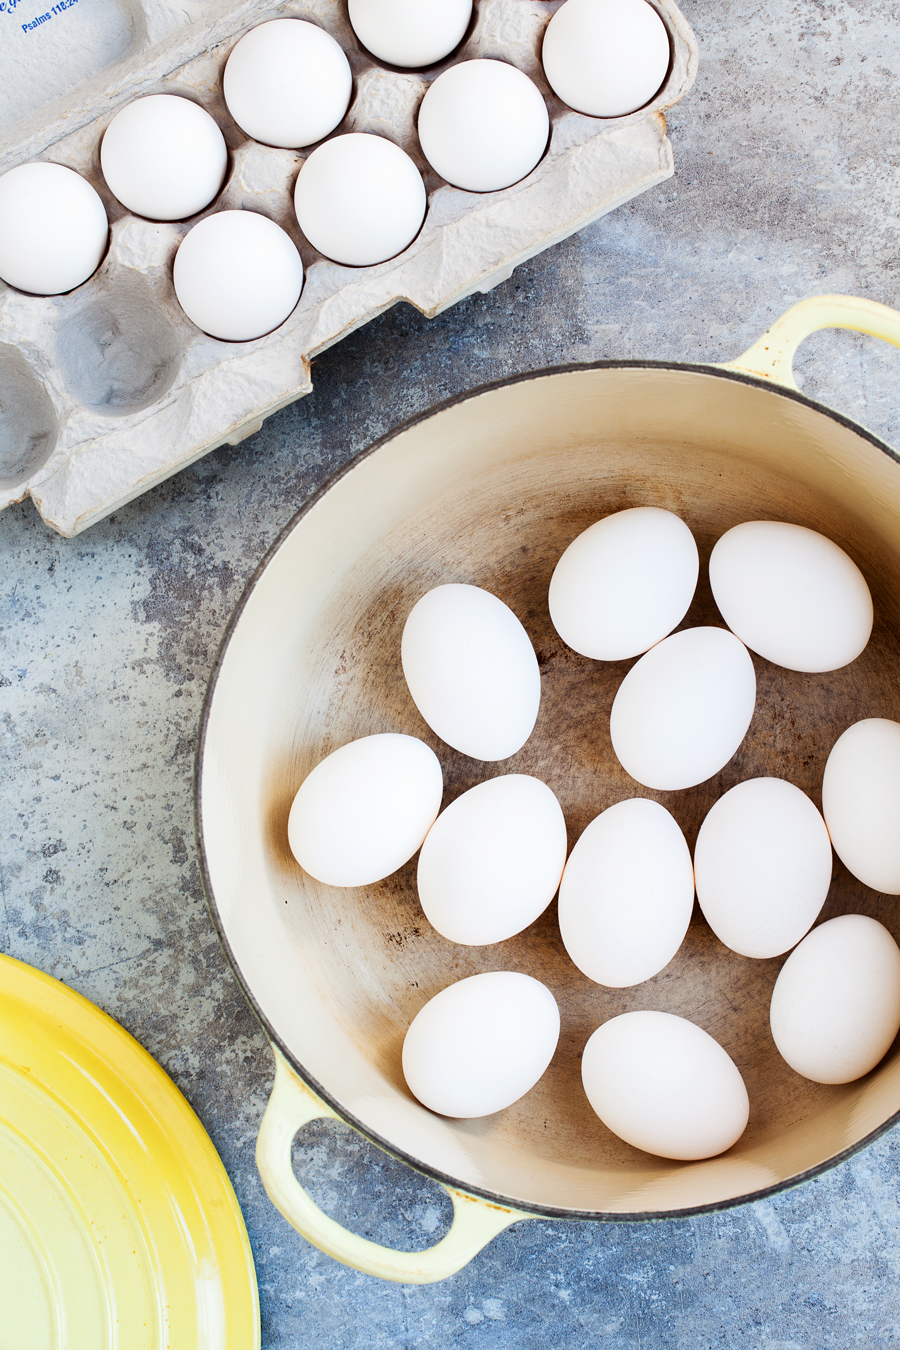 5 Easy tips for Perfect Hard Boiled Eggs.